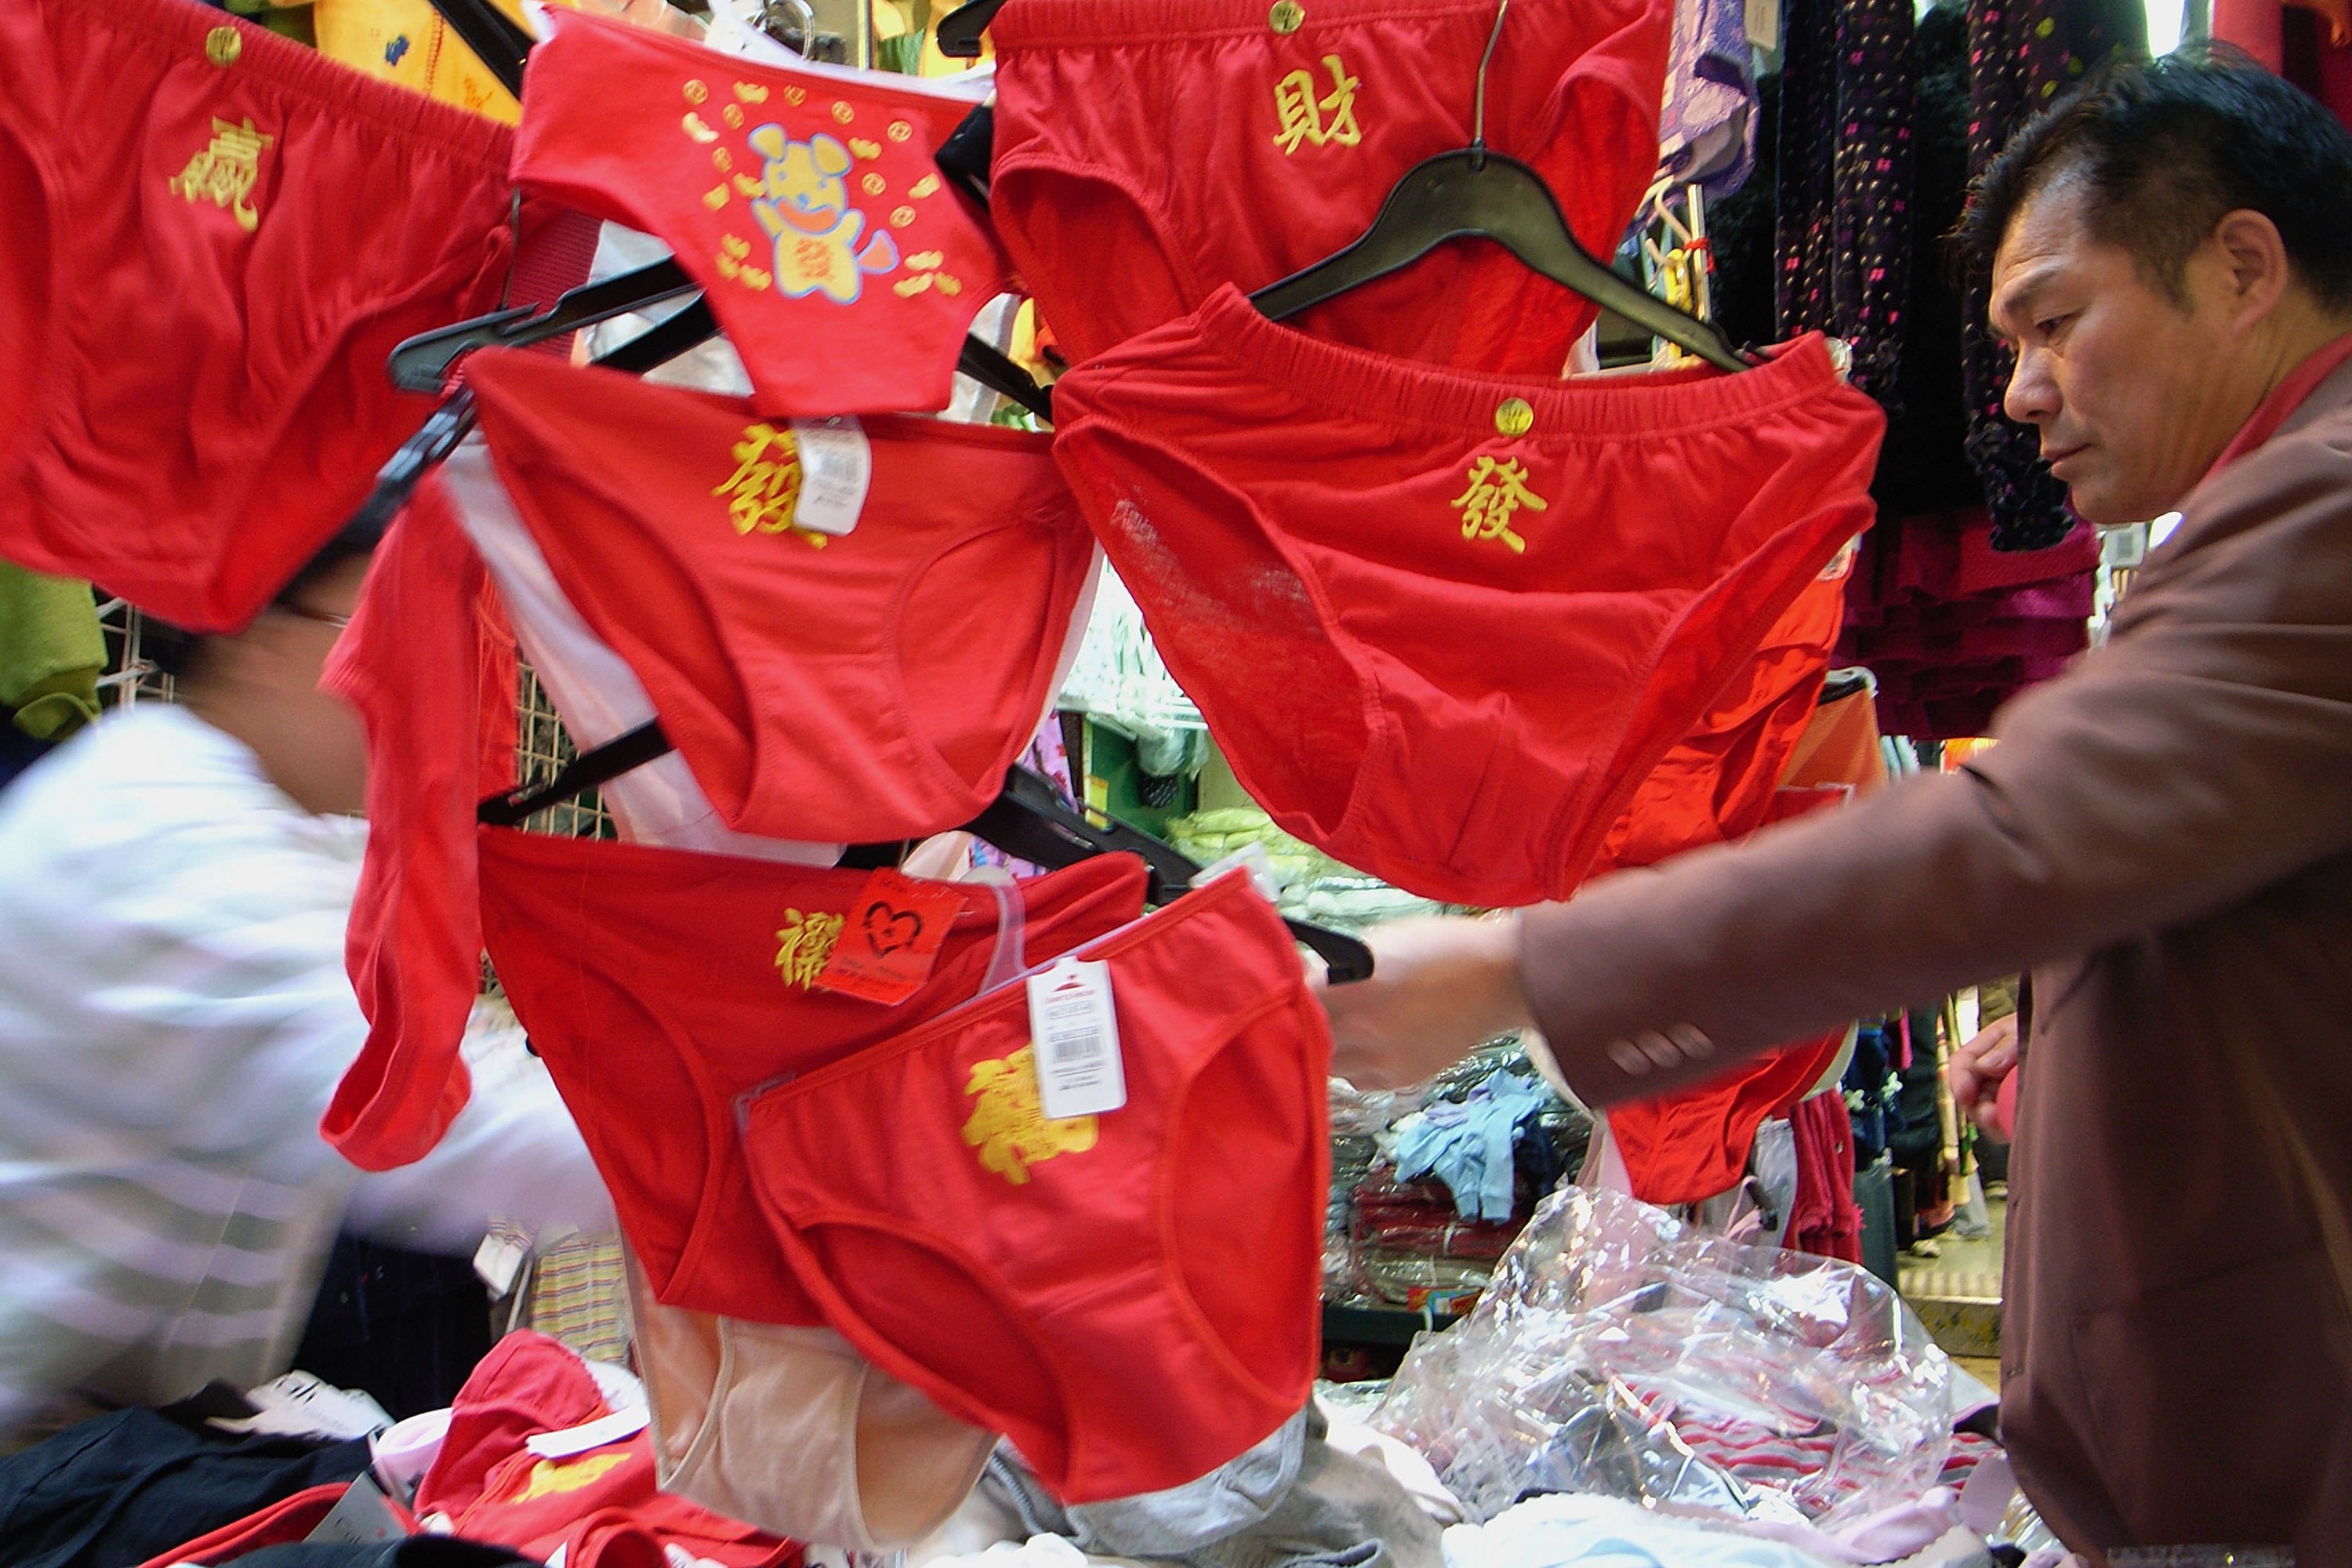 Lunar New Year traditions contribute to fashion industry's waste